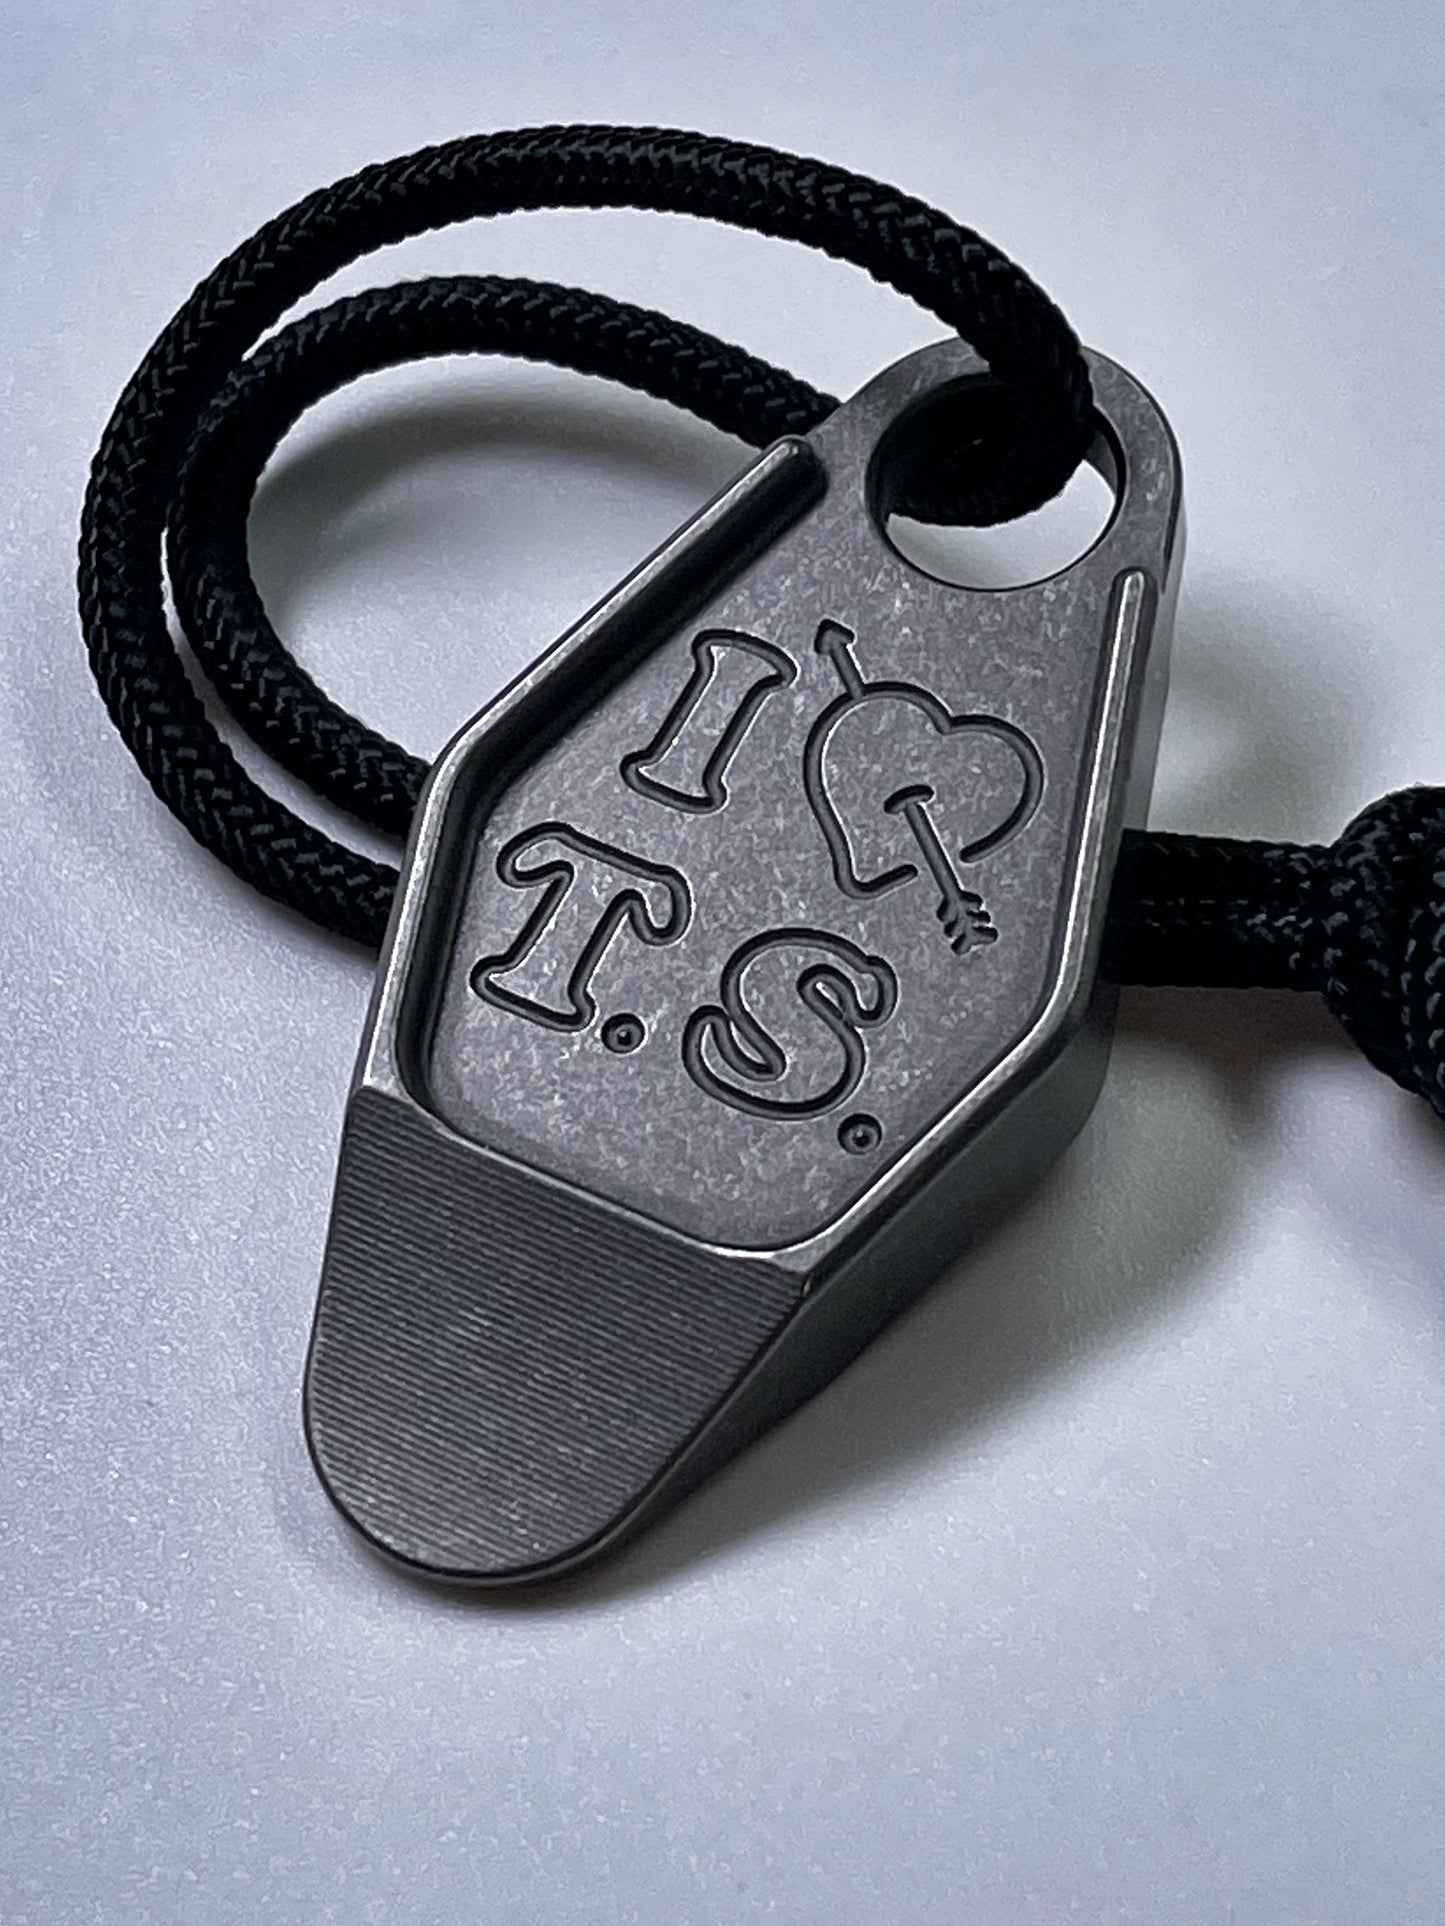 I ♥️ T.S.  “Not Thirsty” Keytag Pry Tool